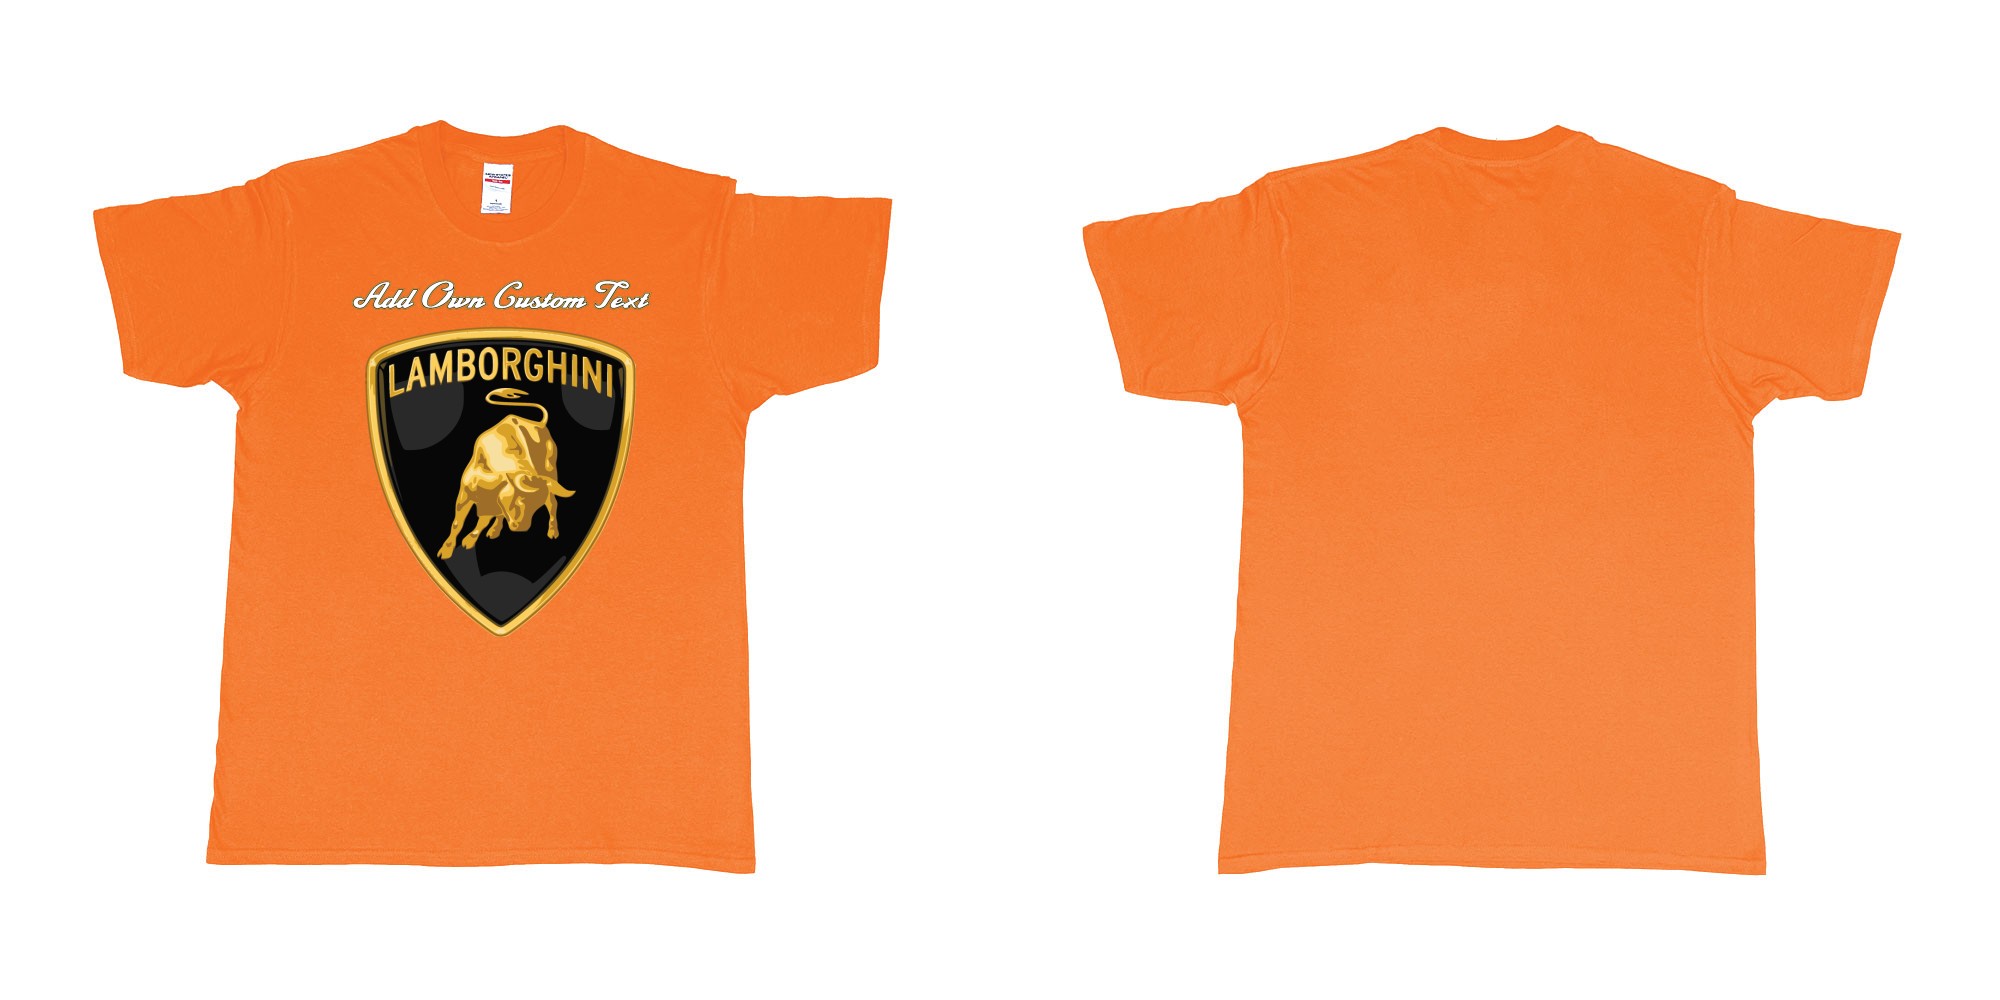 Custom tshirt design lamborghini logo tshirt printing add own text in fabric color orange choice your own text made in Bali by The Pirate Way